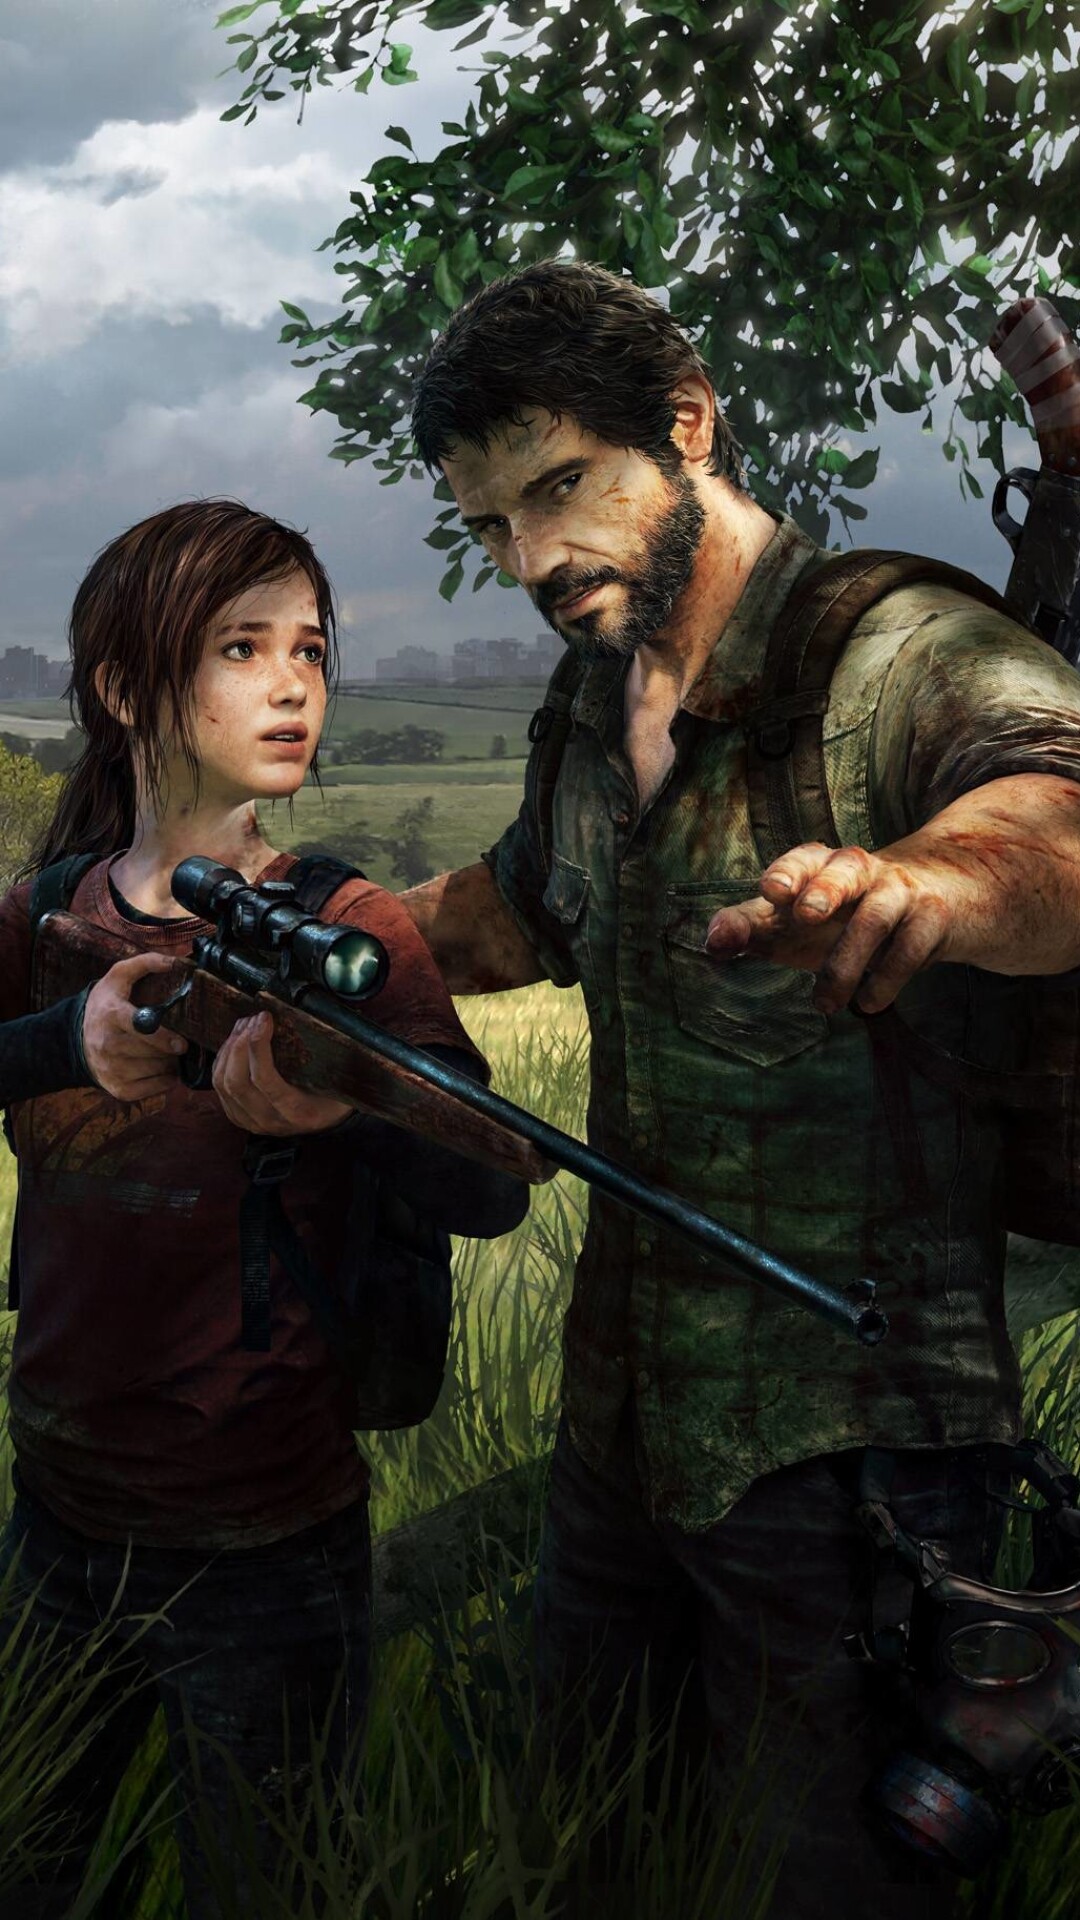 The Last of Us: Joel, a hardened survivor, and Ellie, a brave young teenage girl who is wise beyond her years, must work together if they hope to survive their journey across the US, Video game. 1080x1920 Full HD Wallpaper.